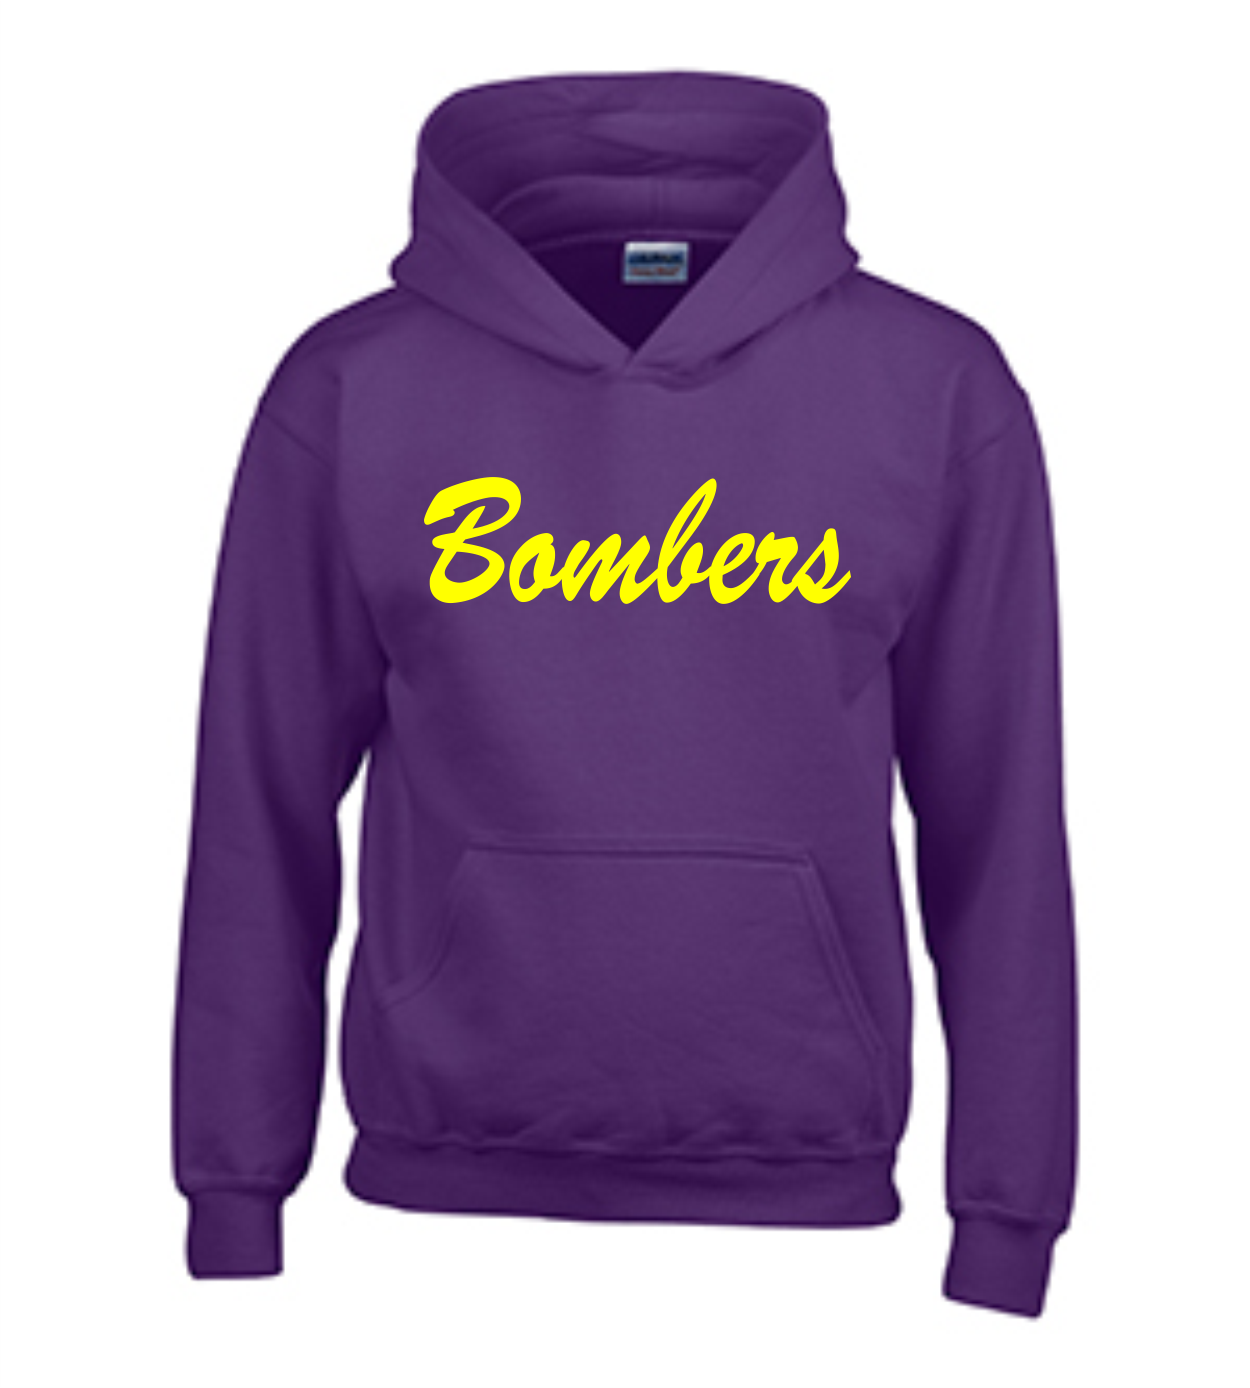 Hooded Cotton Sweatshirt - Adult & Youth - Add Player Name & Number on Back (Optional)